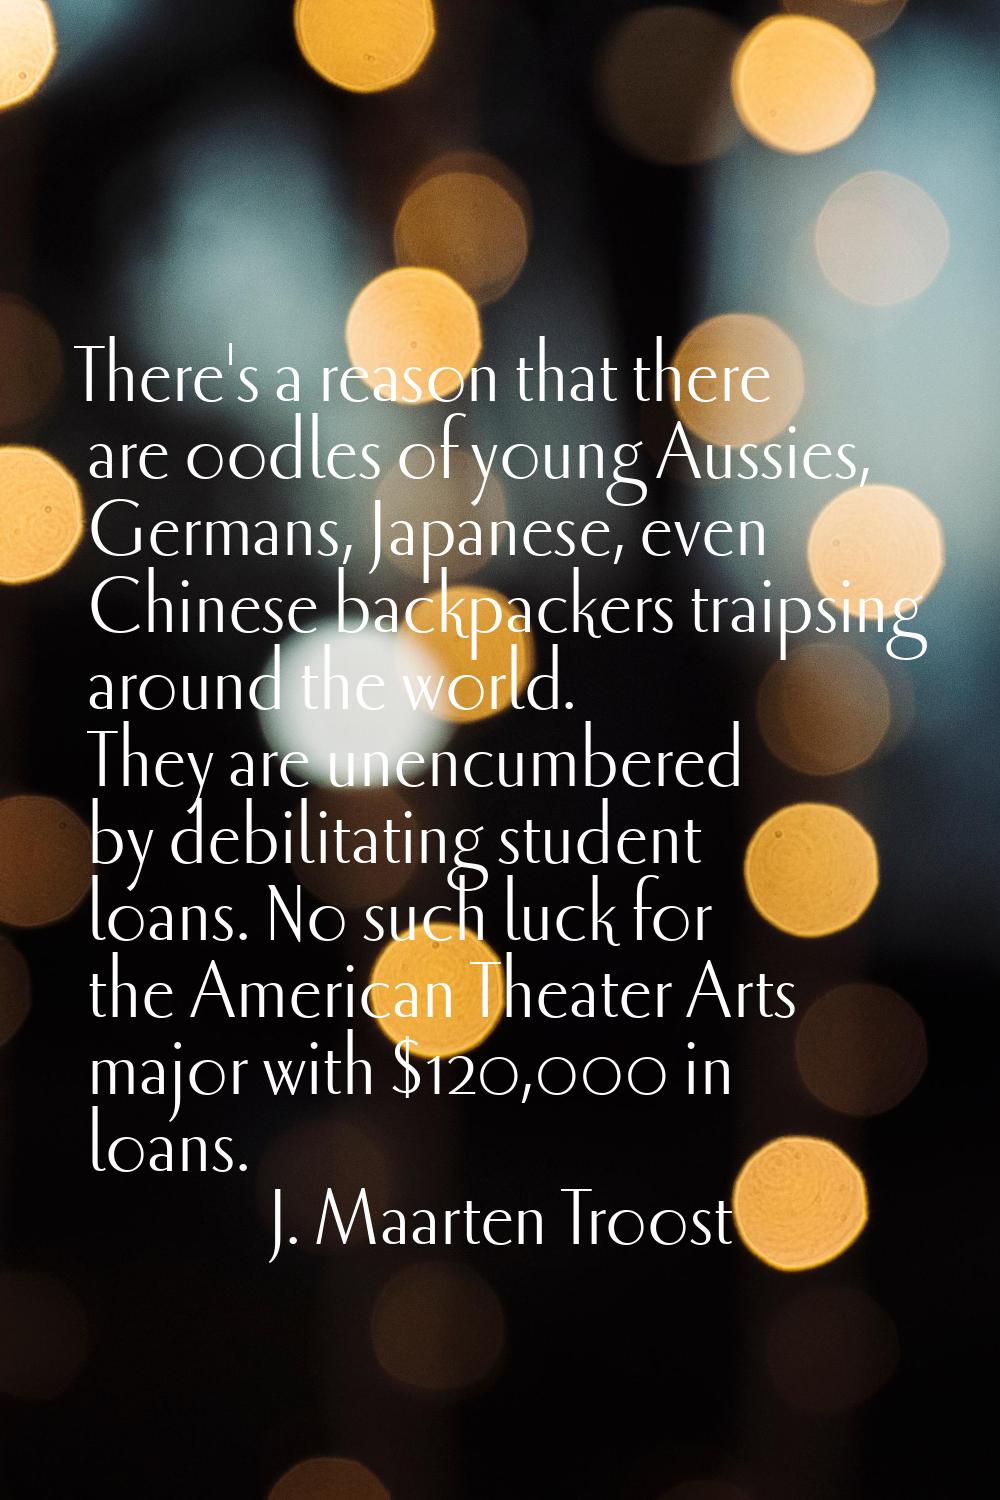 There's a reason that there are oodles of young Aussies, Germans, Japanese, even Chinese backpacker